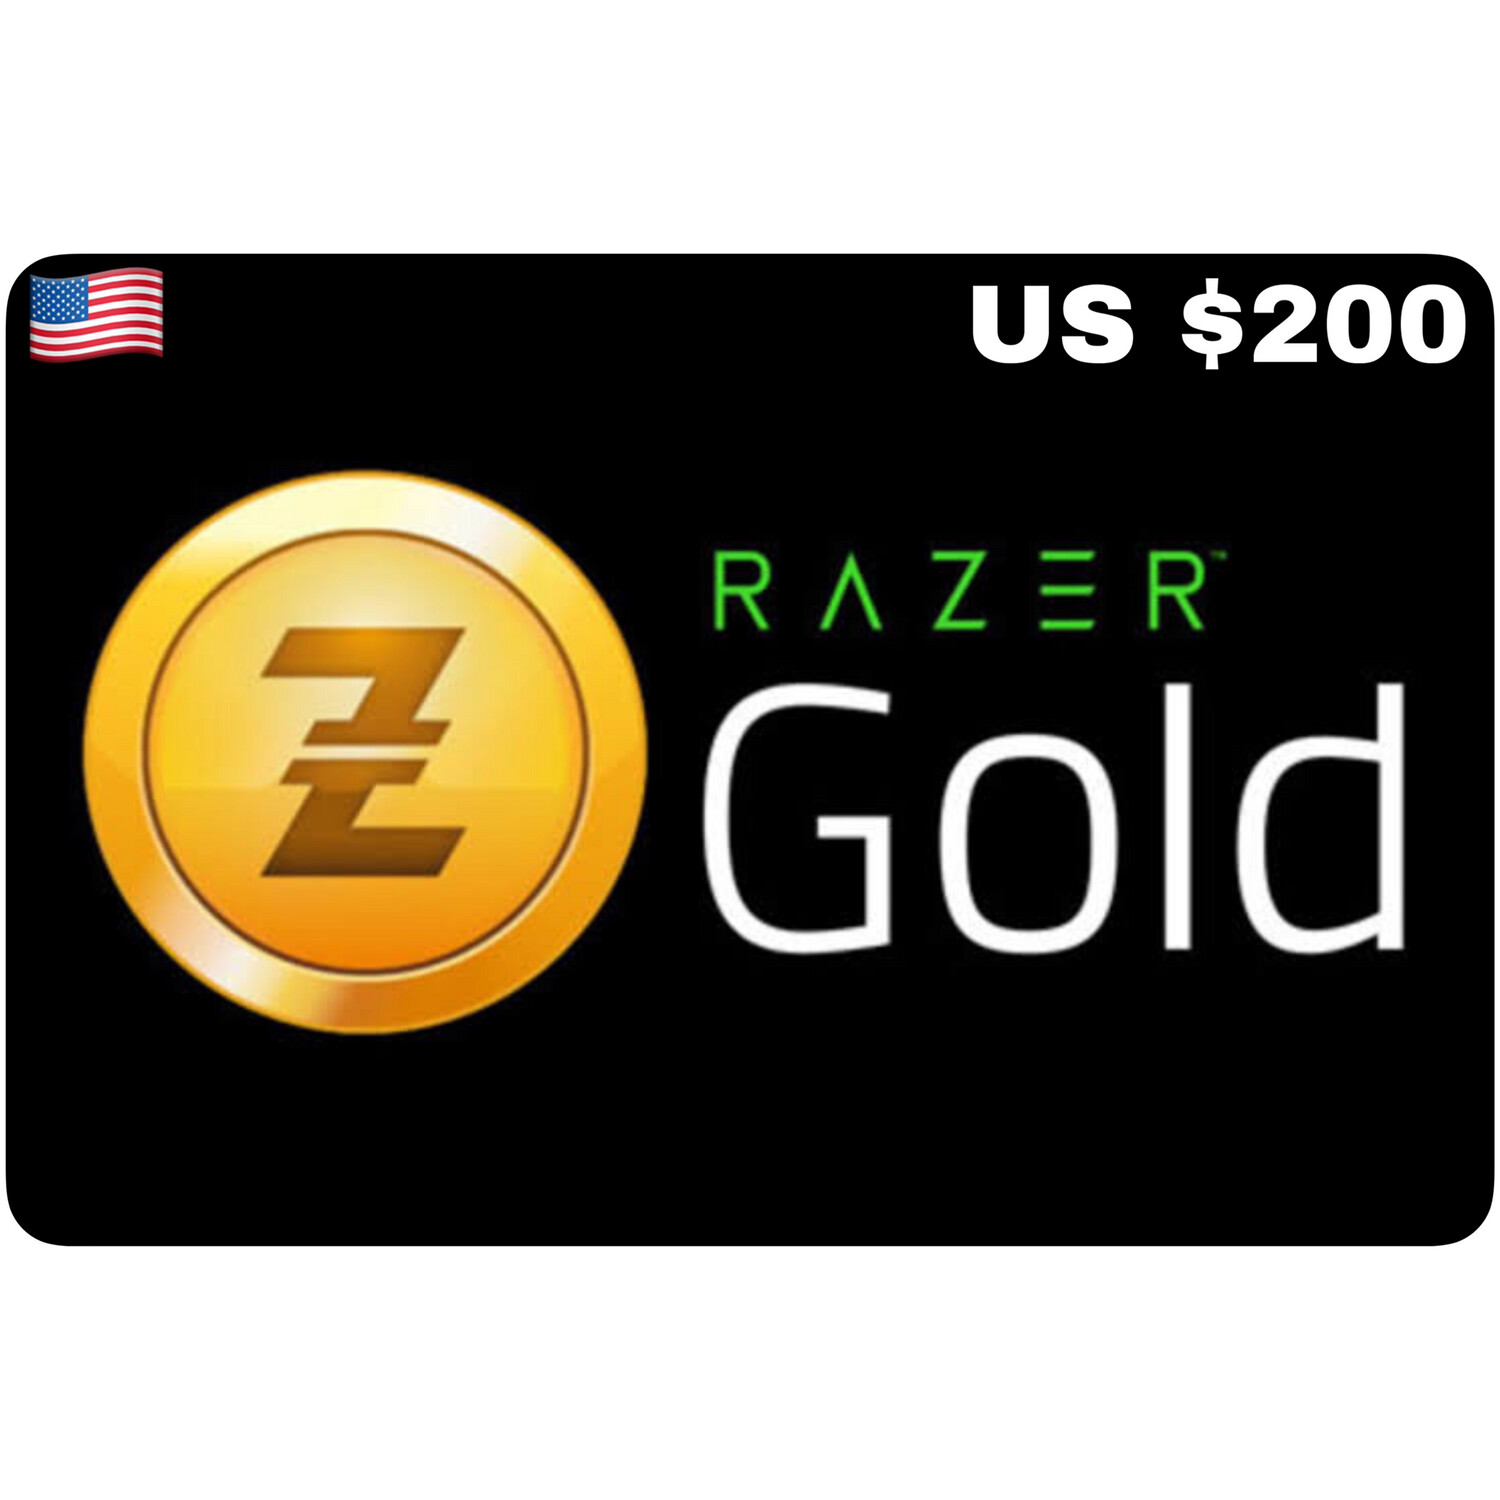 Razer Gold Pin US USD $200 Pin Only